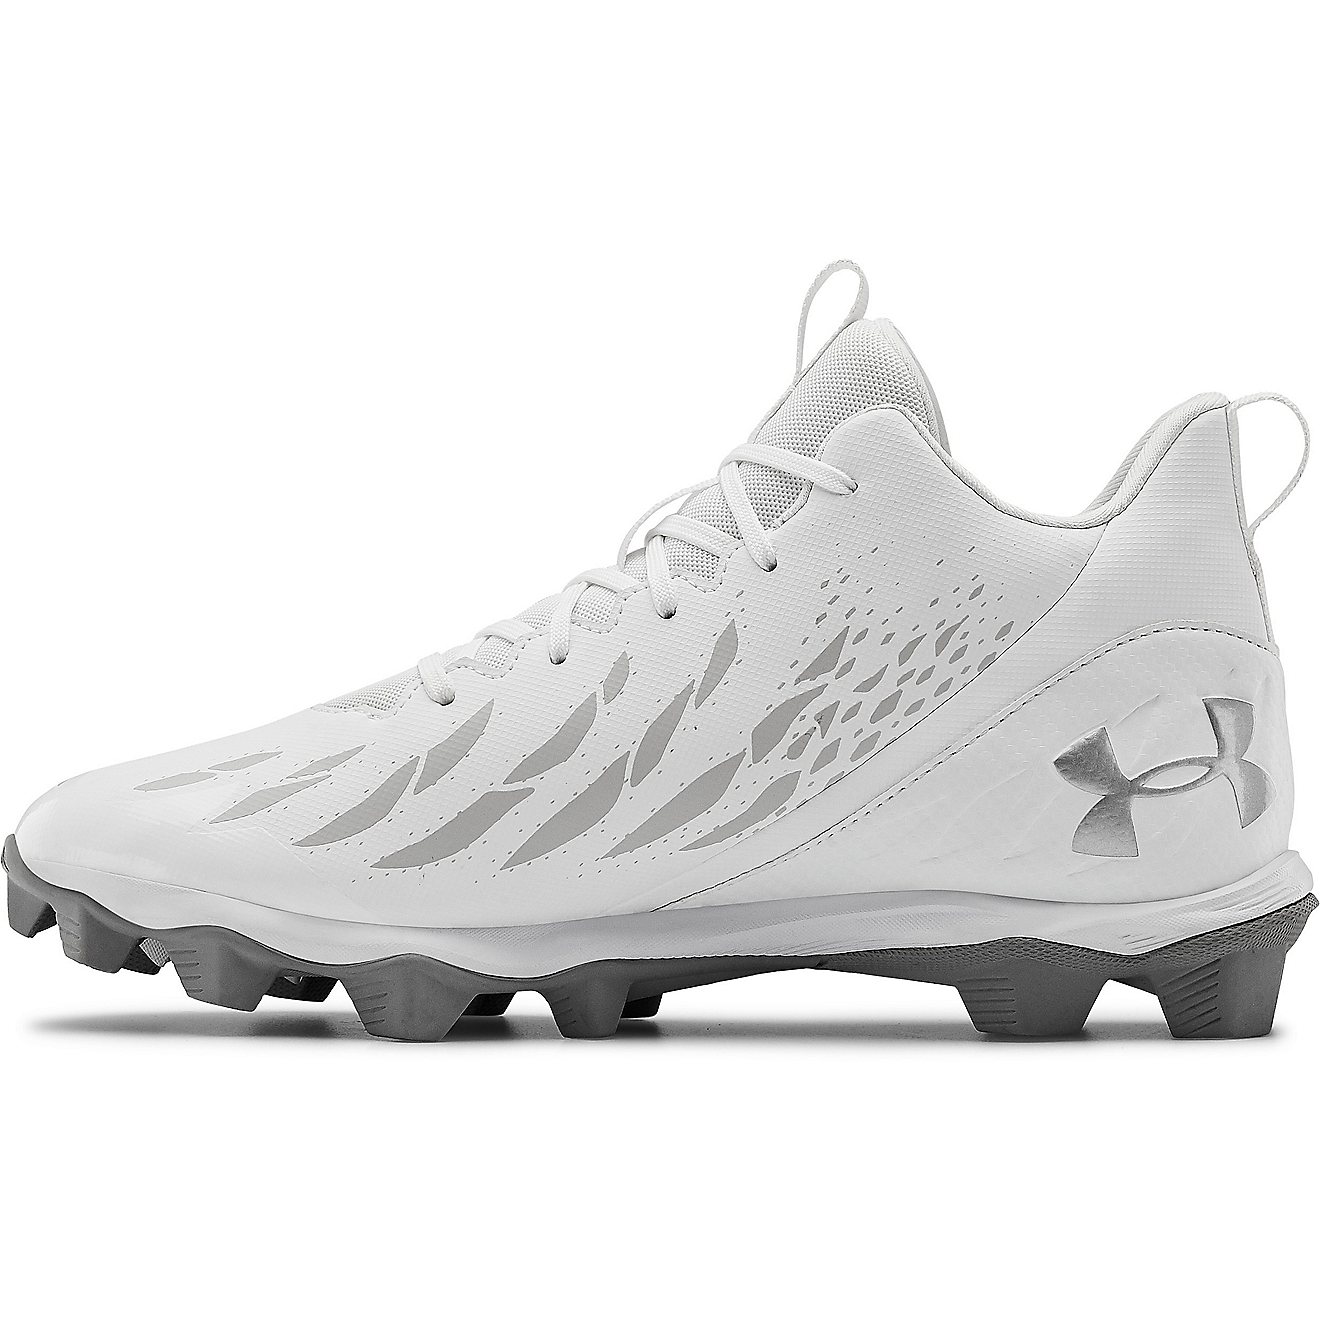 Under Armour Men's Spotlight Franchise Football Cleats                                                                           - view number 3